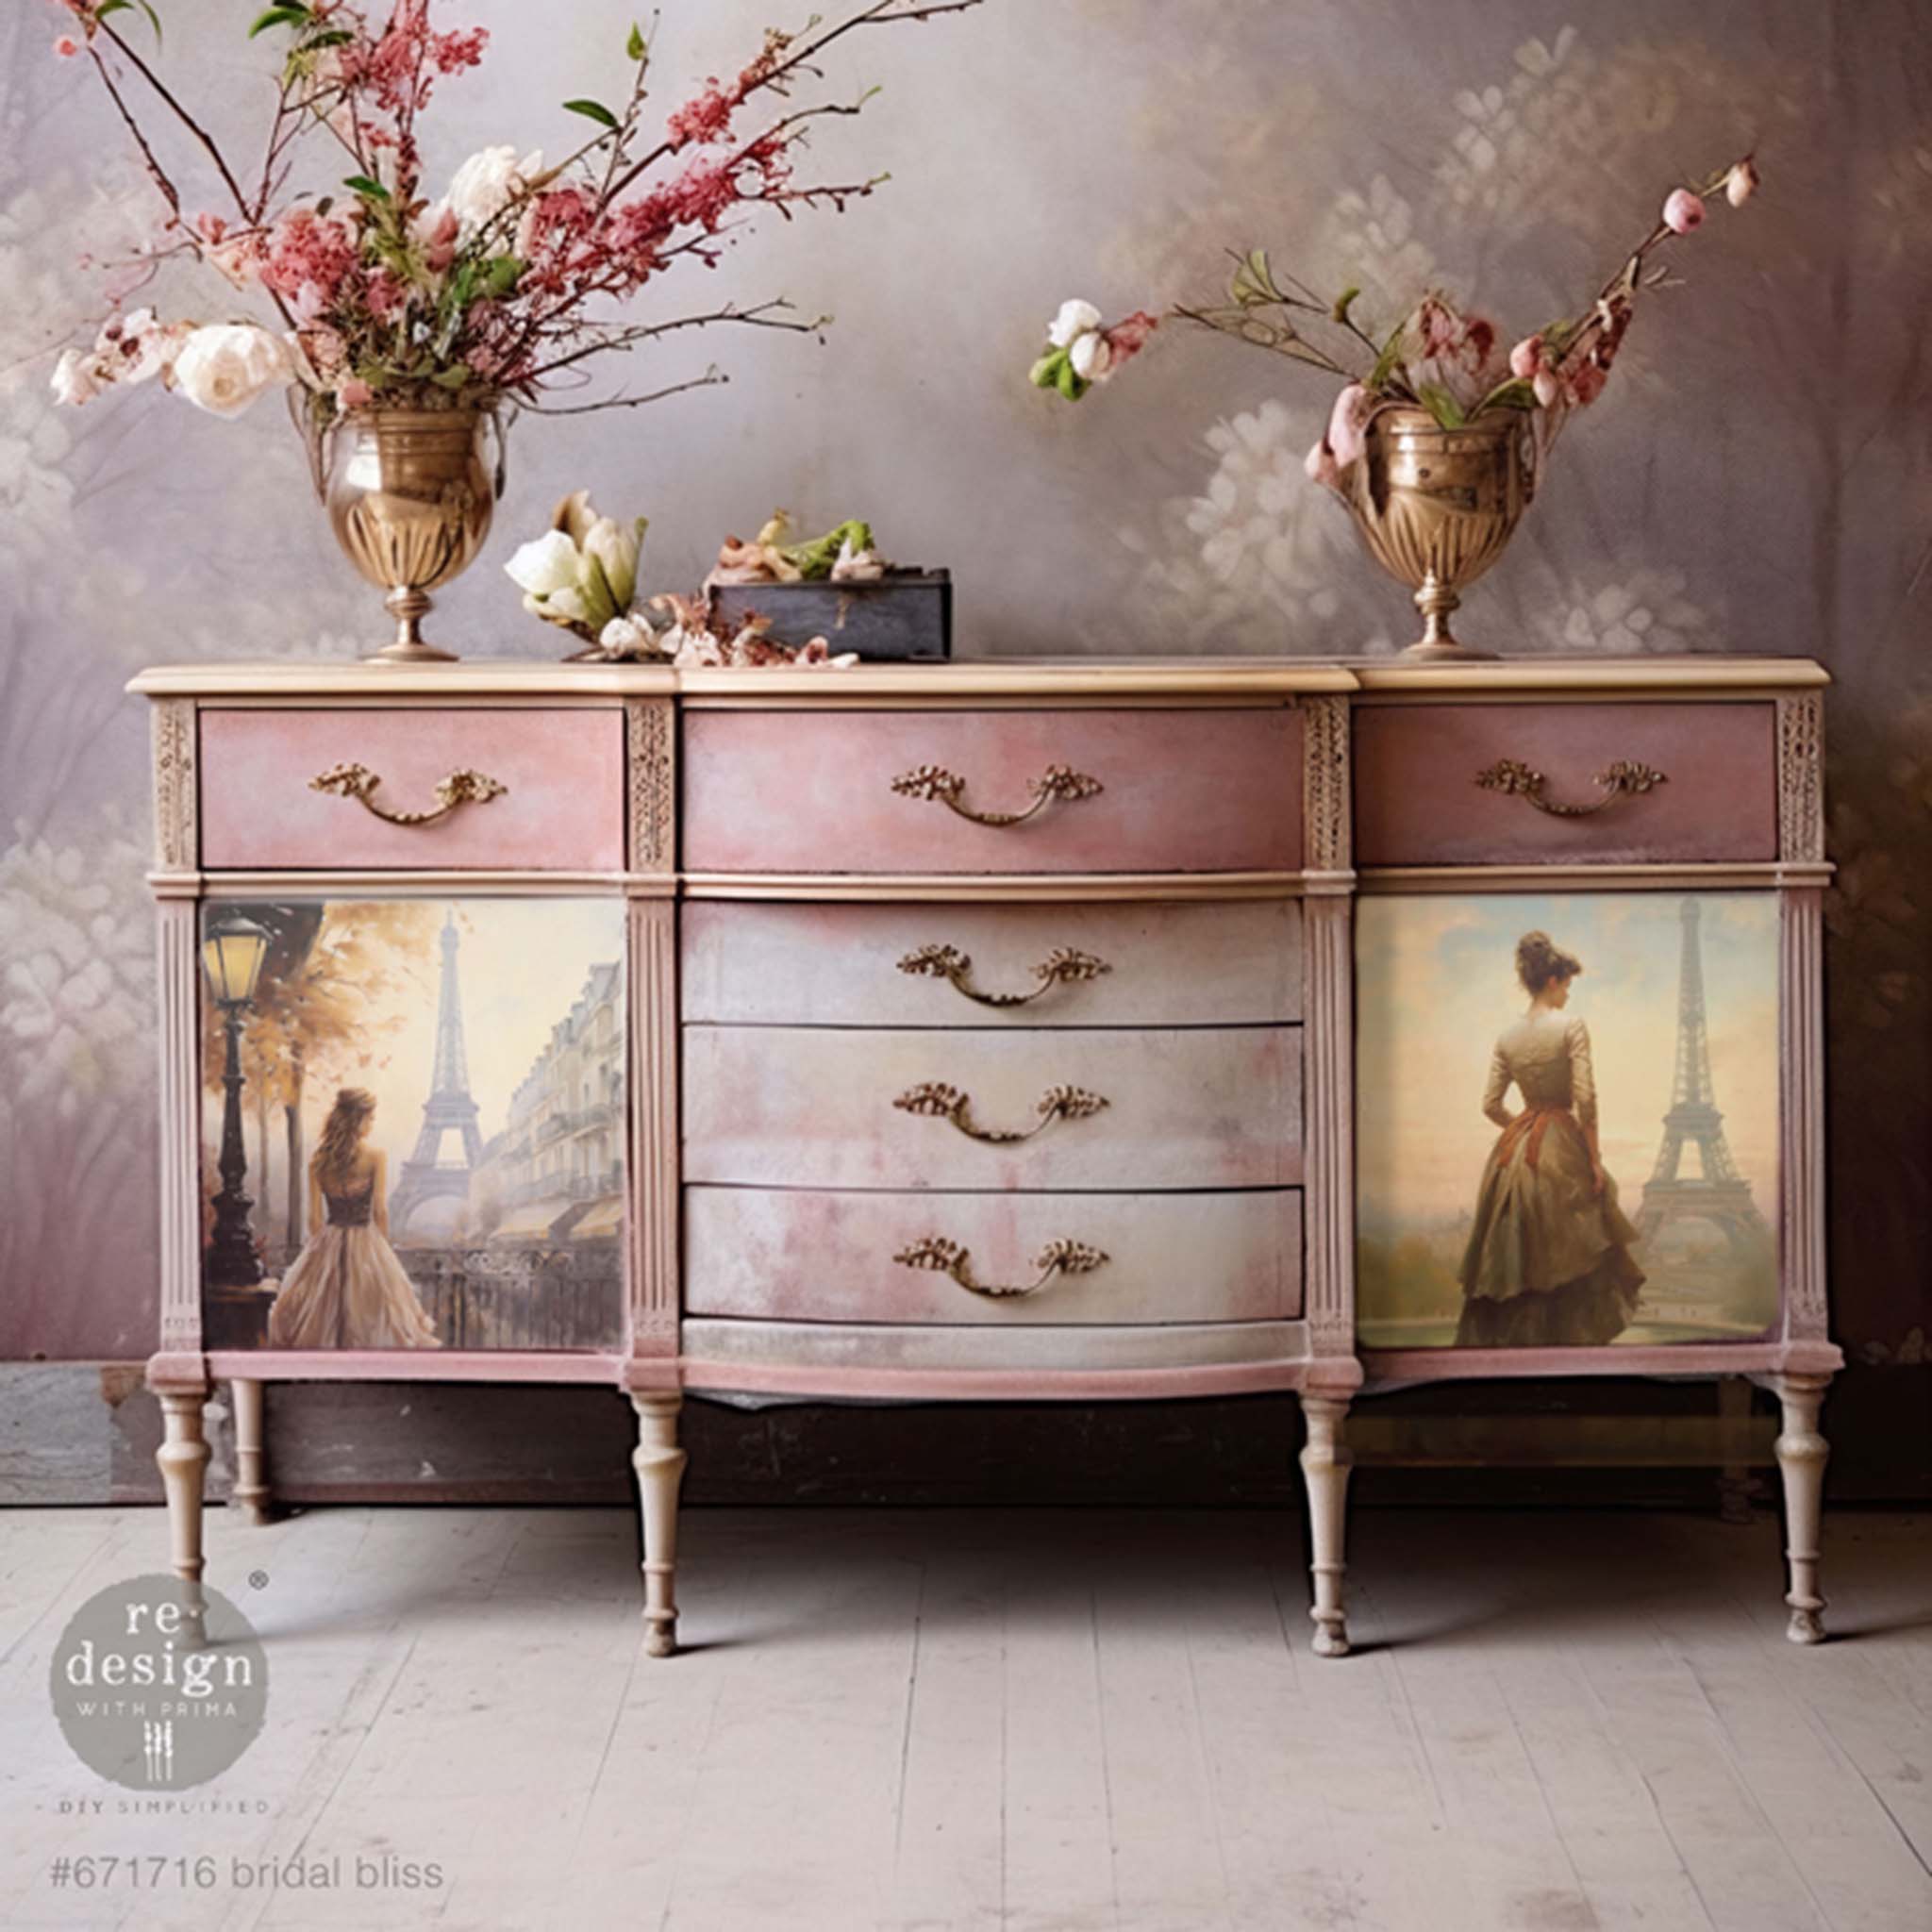 A vintage dresser is painted different shades of light pink and feature ReDesign with Prima's Bridal Bliss tissue paper on 2 doors located on the front.